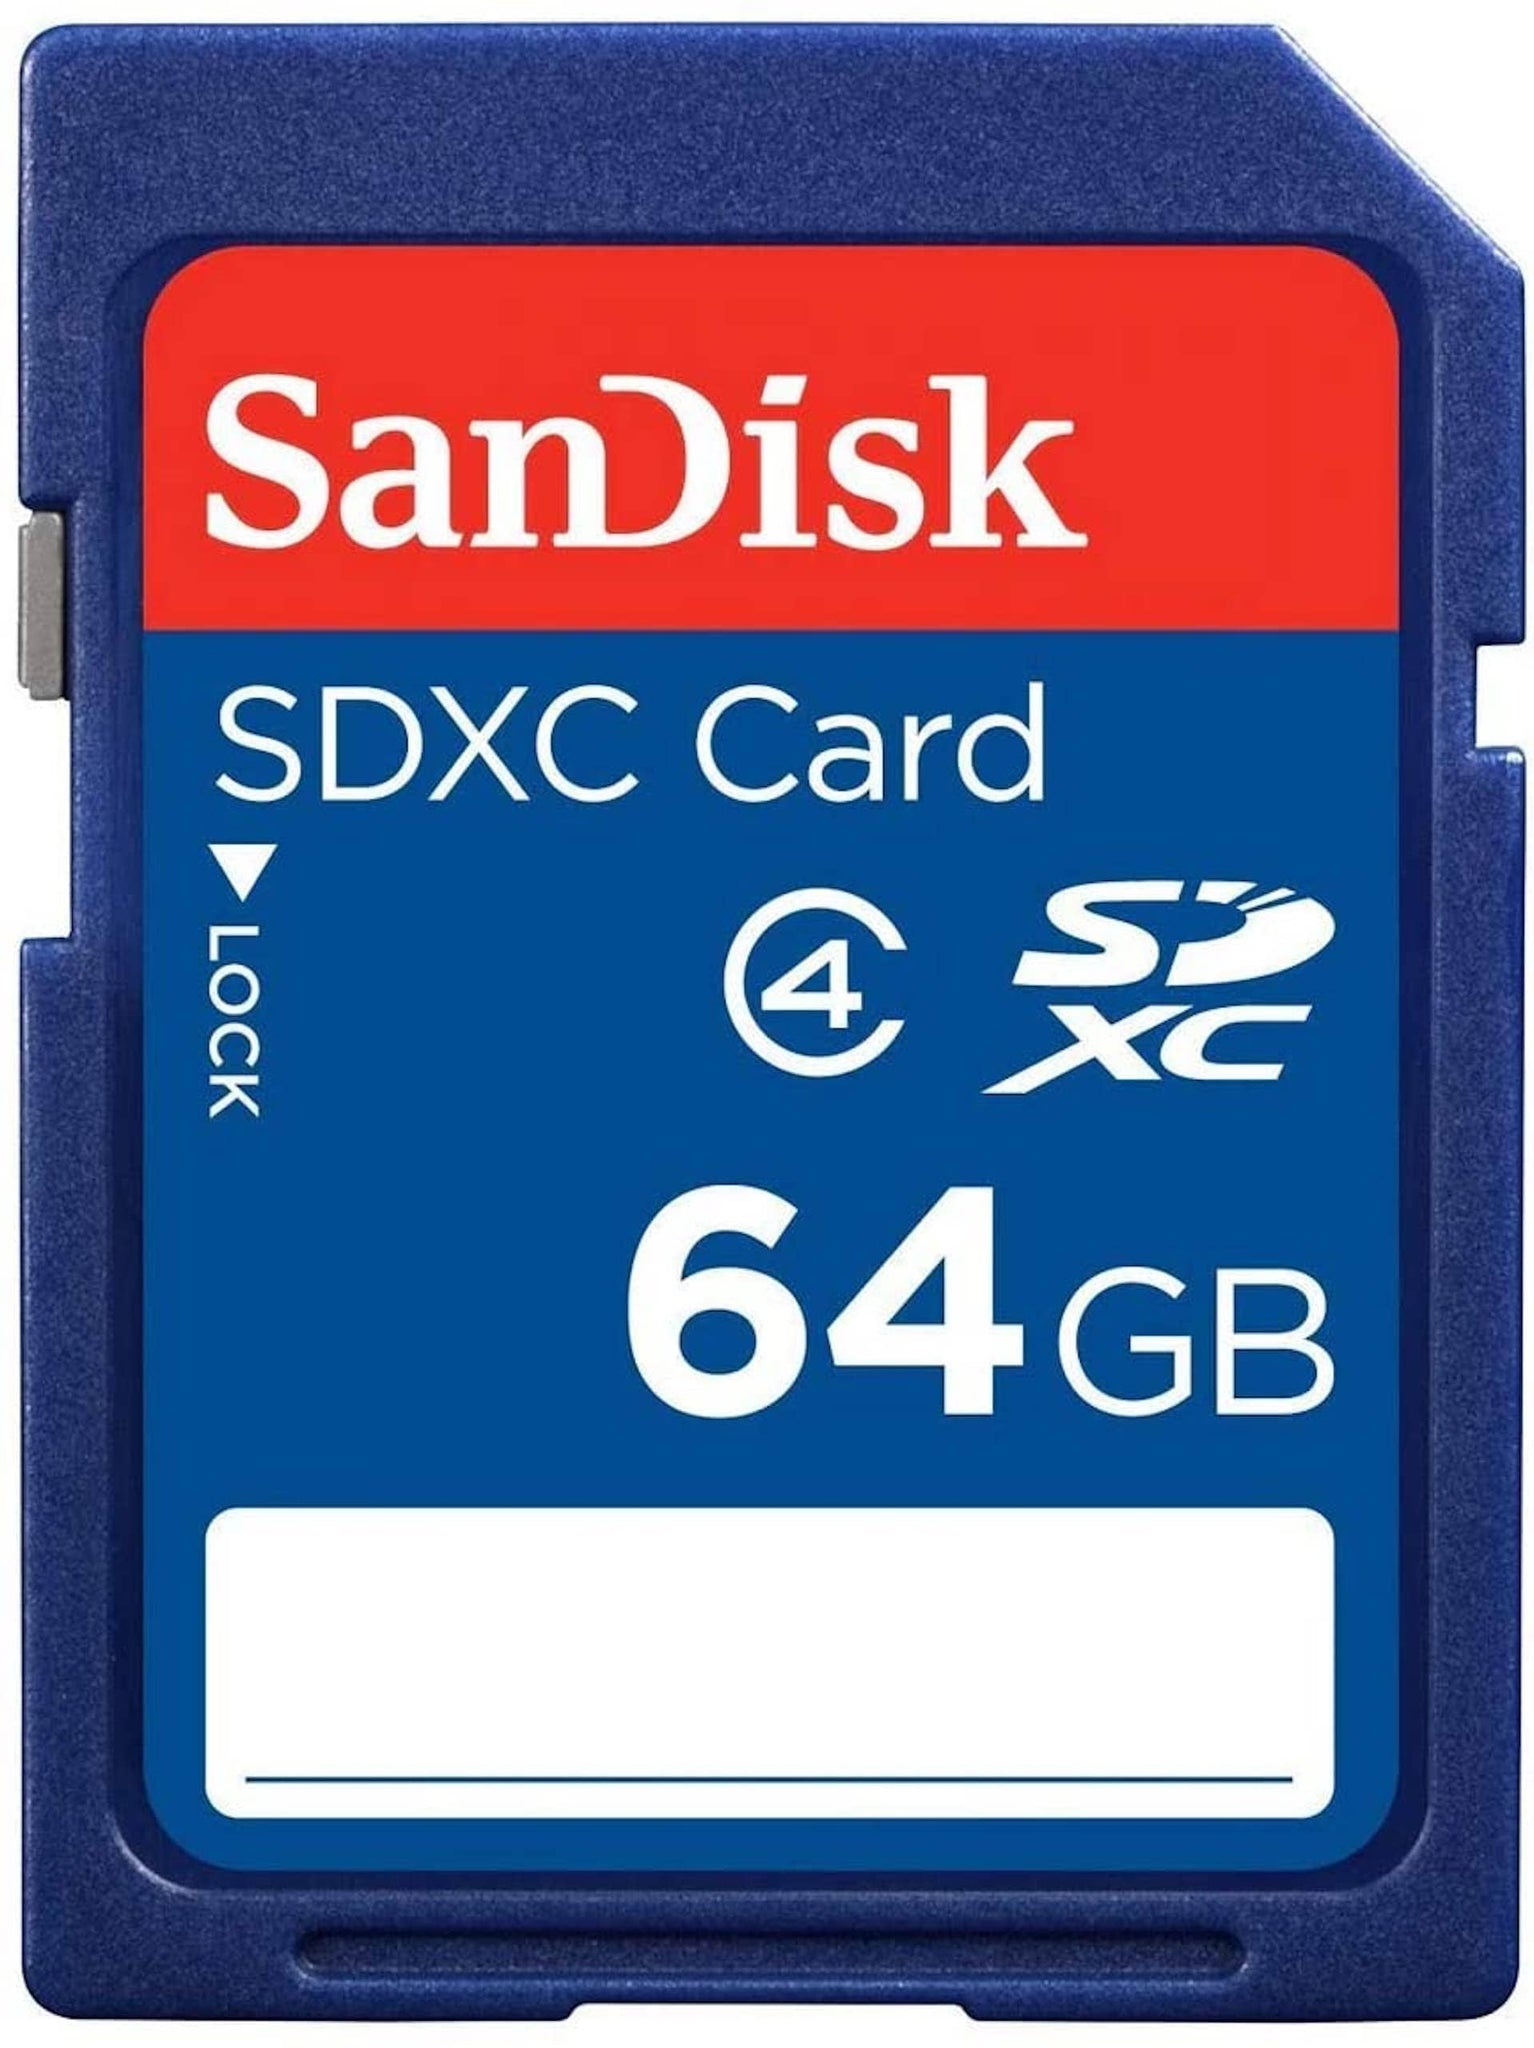 Best Photo Gifts for Photographers - Ideas Photographer Lovers - Sandisk